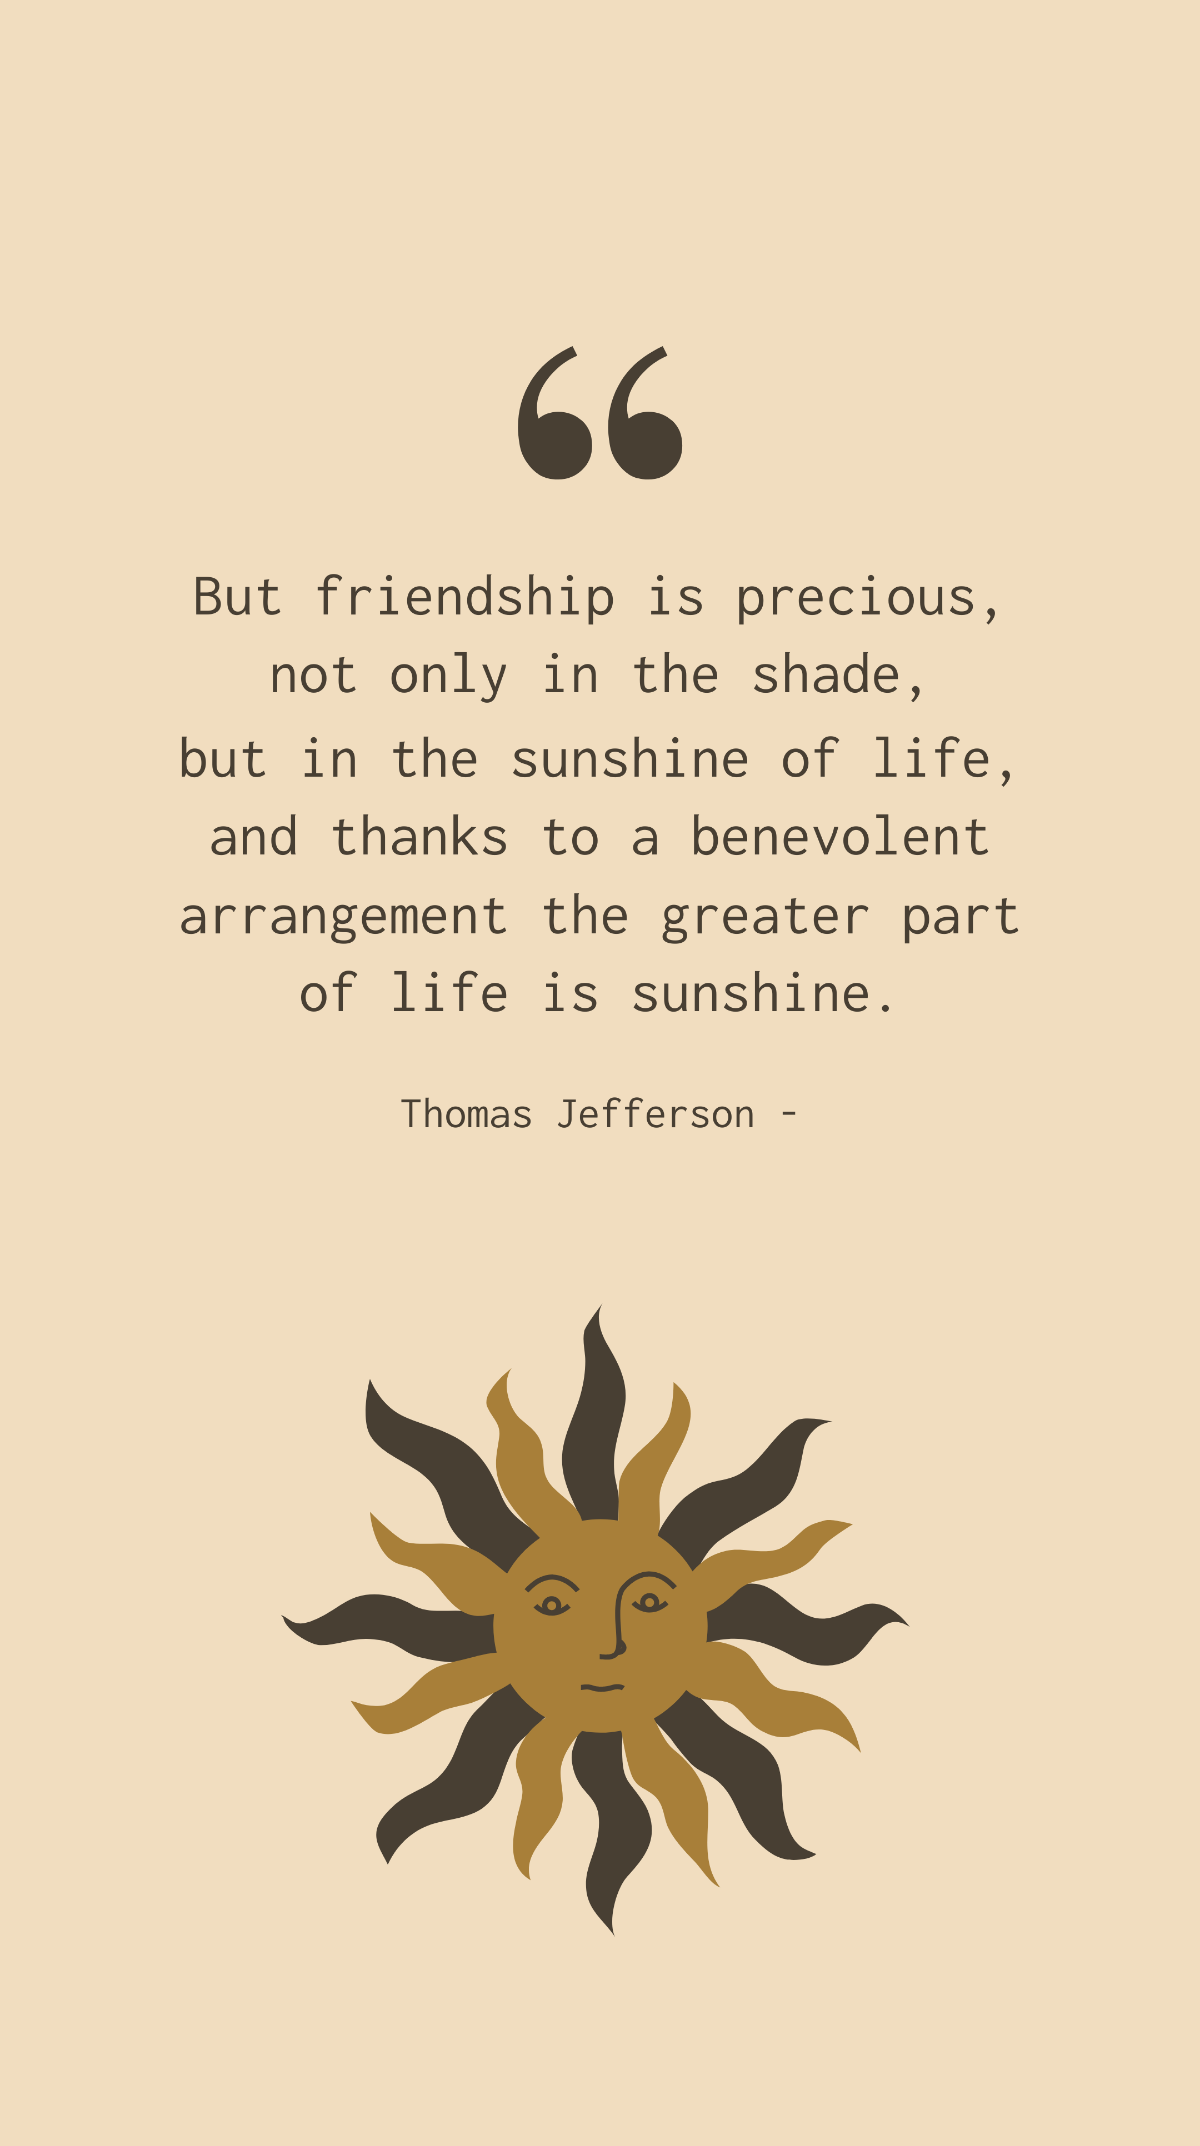 Thomas Jefferson - But friendship is precious, not only in the shade, but in the sunshine of life, and thanks to a benevolent arrangement the greater part of life is sunshine. Template